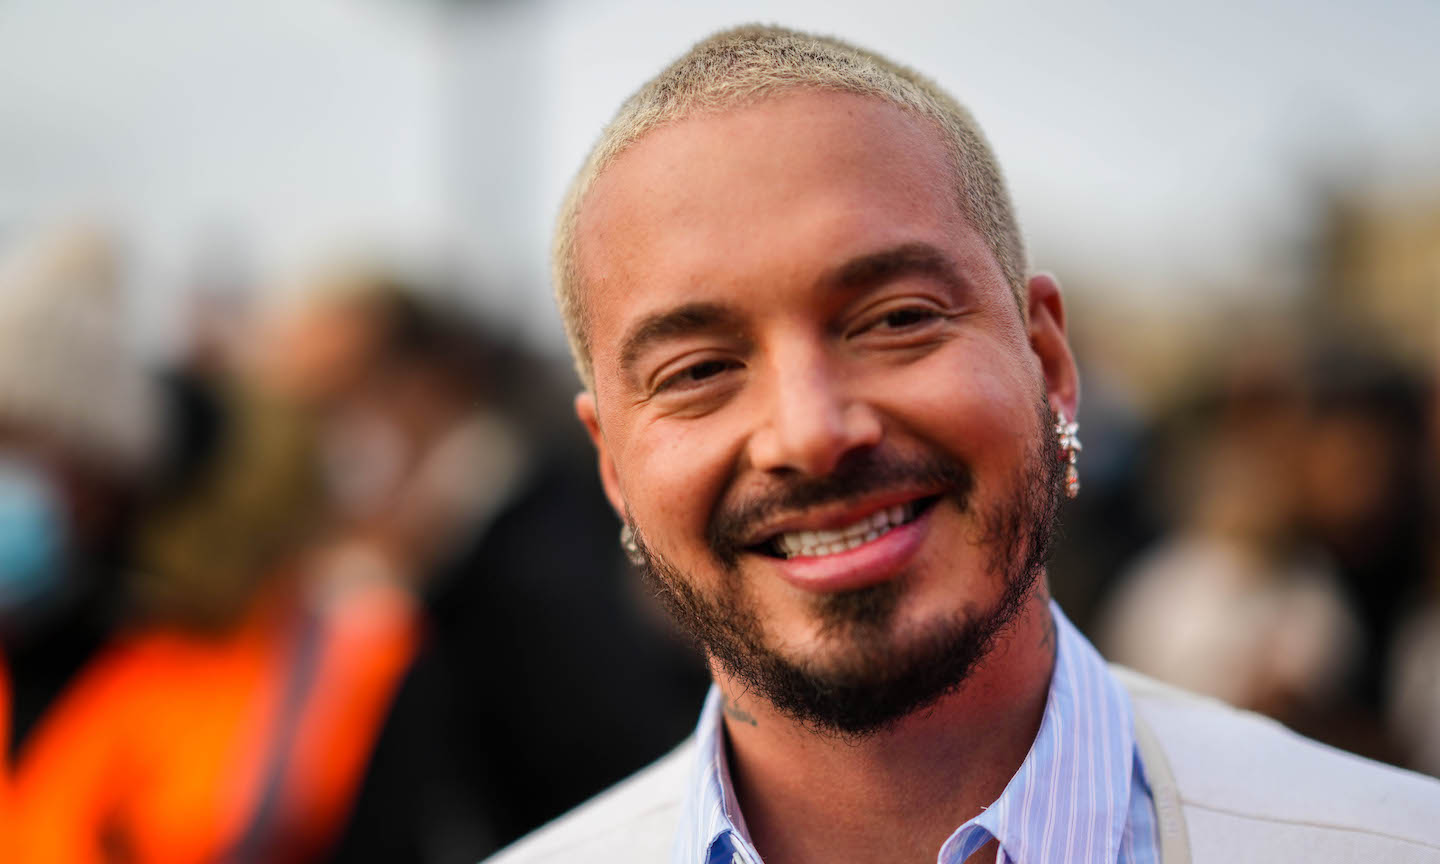 J Balvin Shares The Ways He Preserves His Own Mental Health: 'I'm medicated